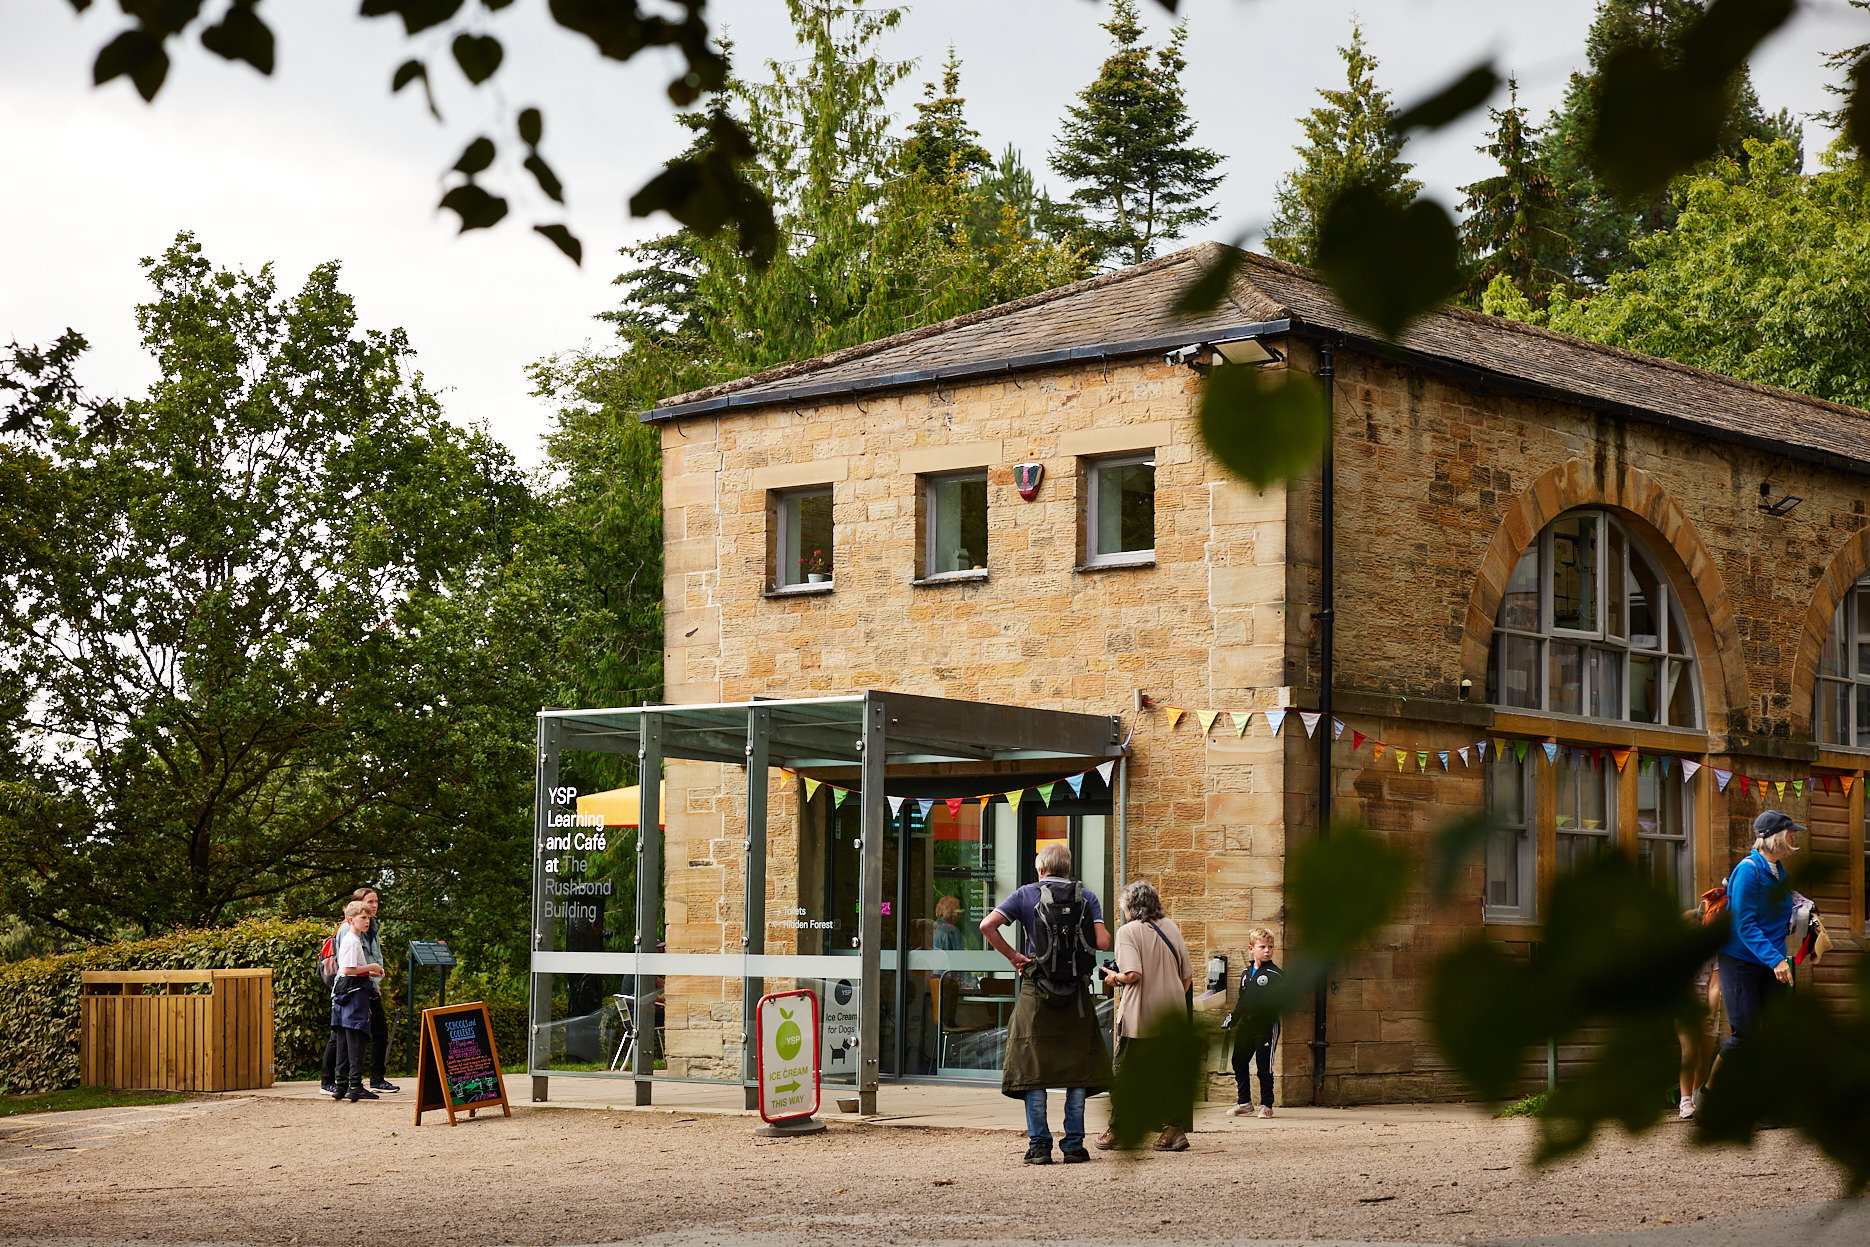 The exterior of the YSP Learning building and cafe.